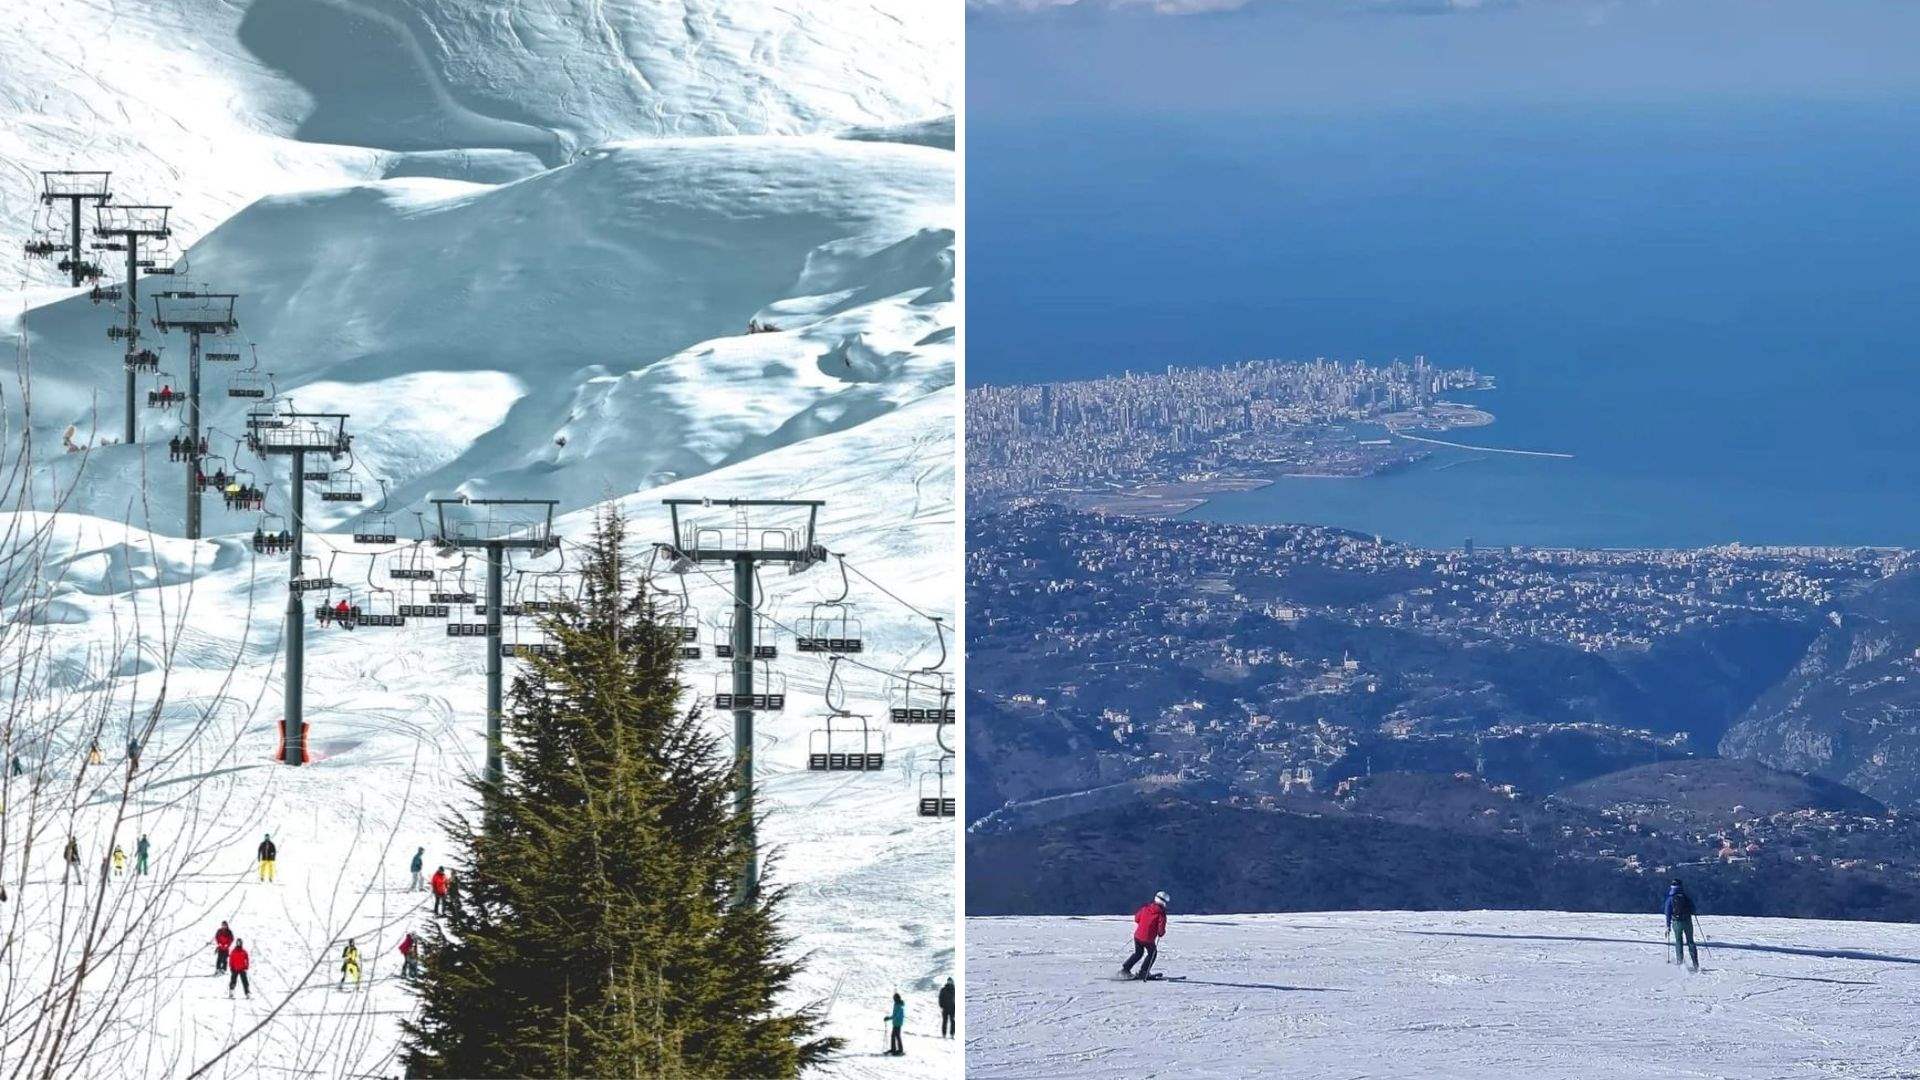 &#39;Winter wonder&#39; in the Middle East: The everlasting allure of Lebanon&#39;s skiing legacy